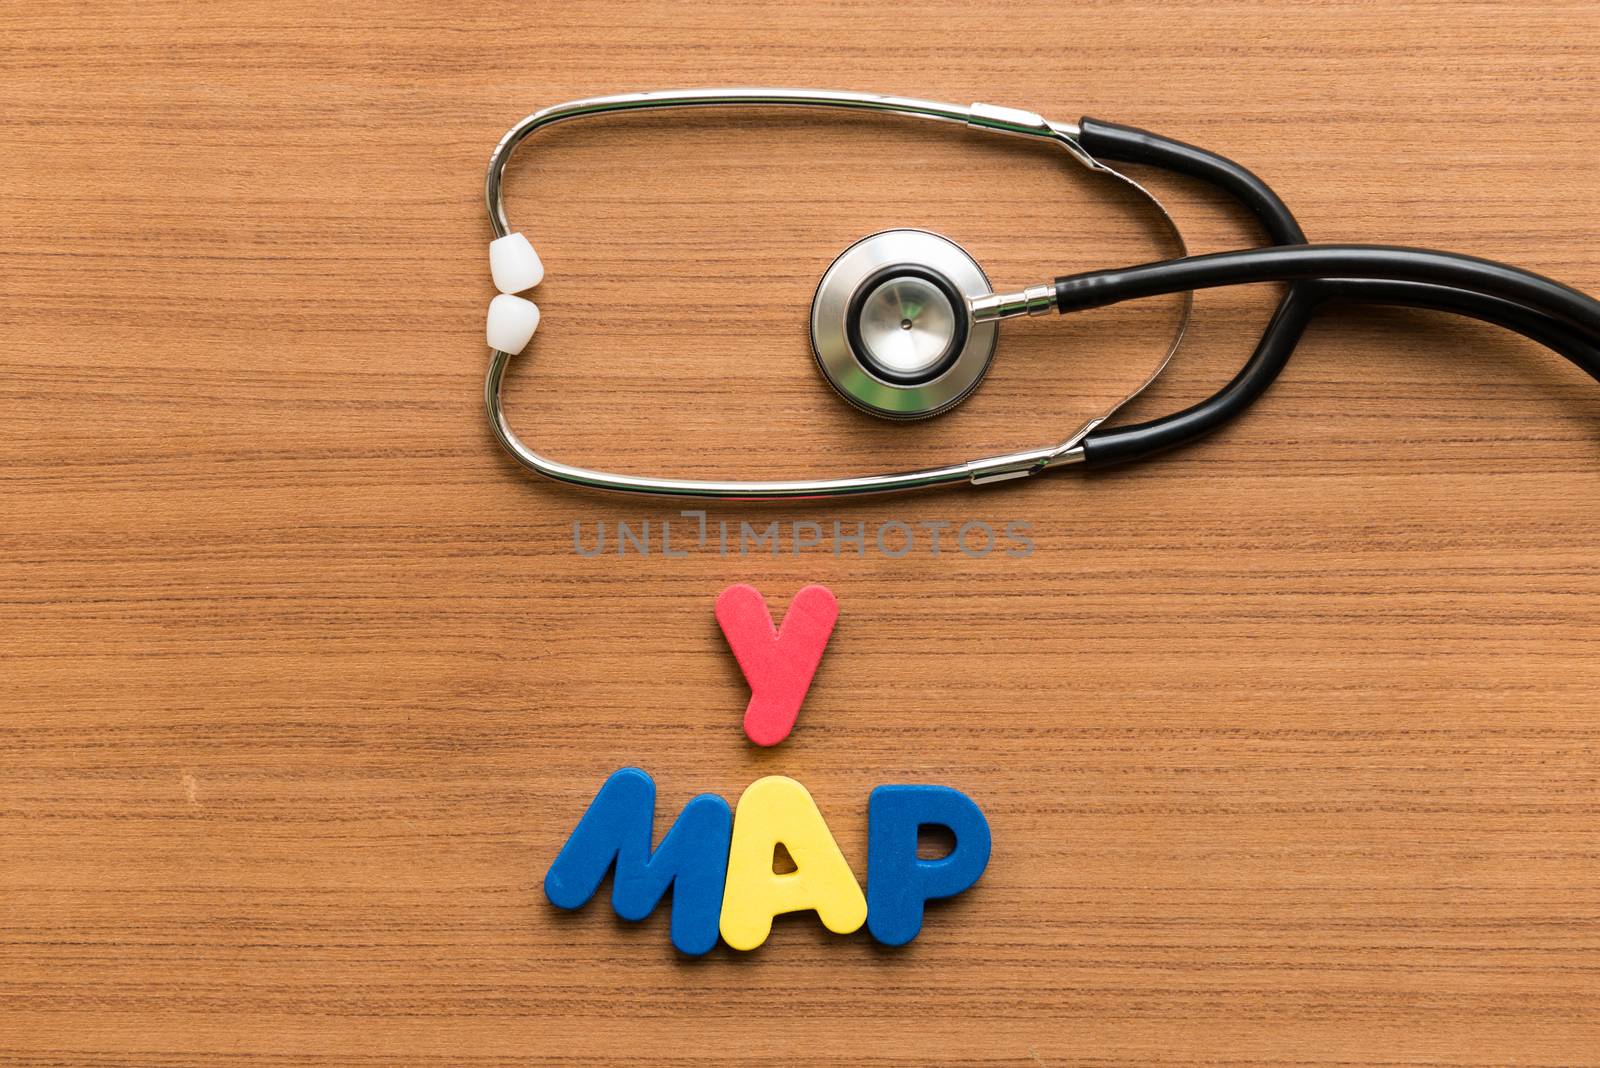 y map colorful word with stethoscope by sohel.parvez@hotmail.com